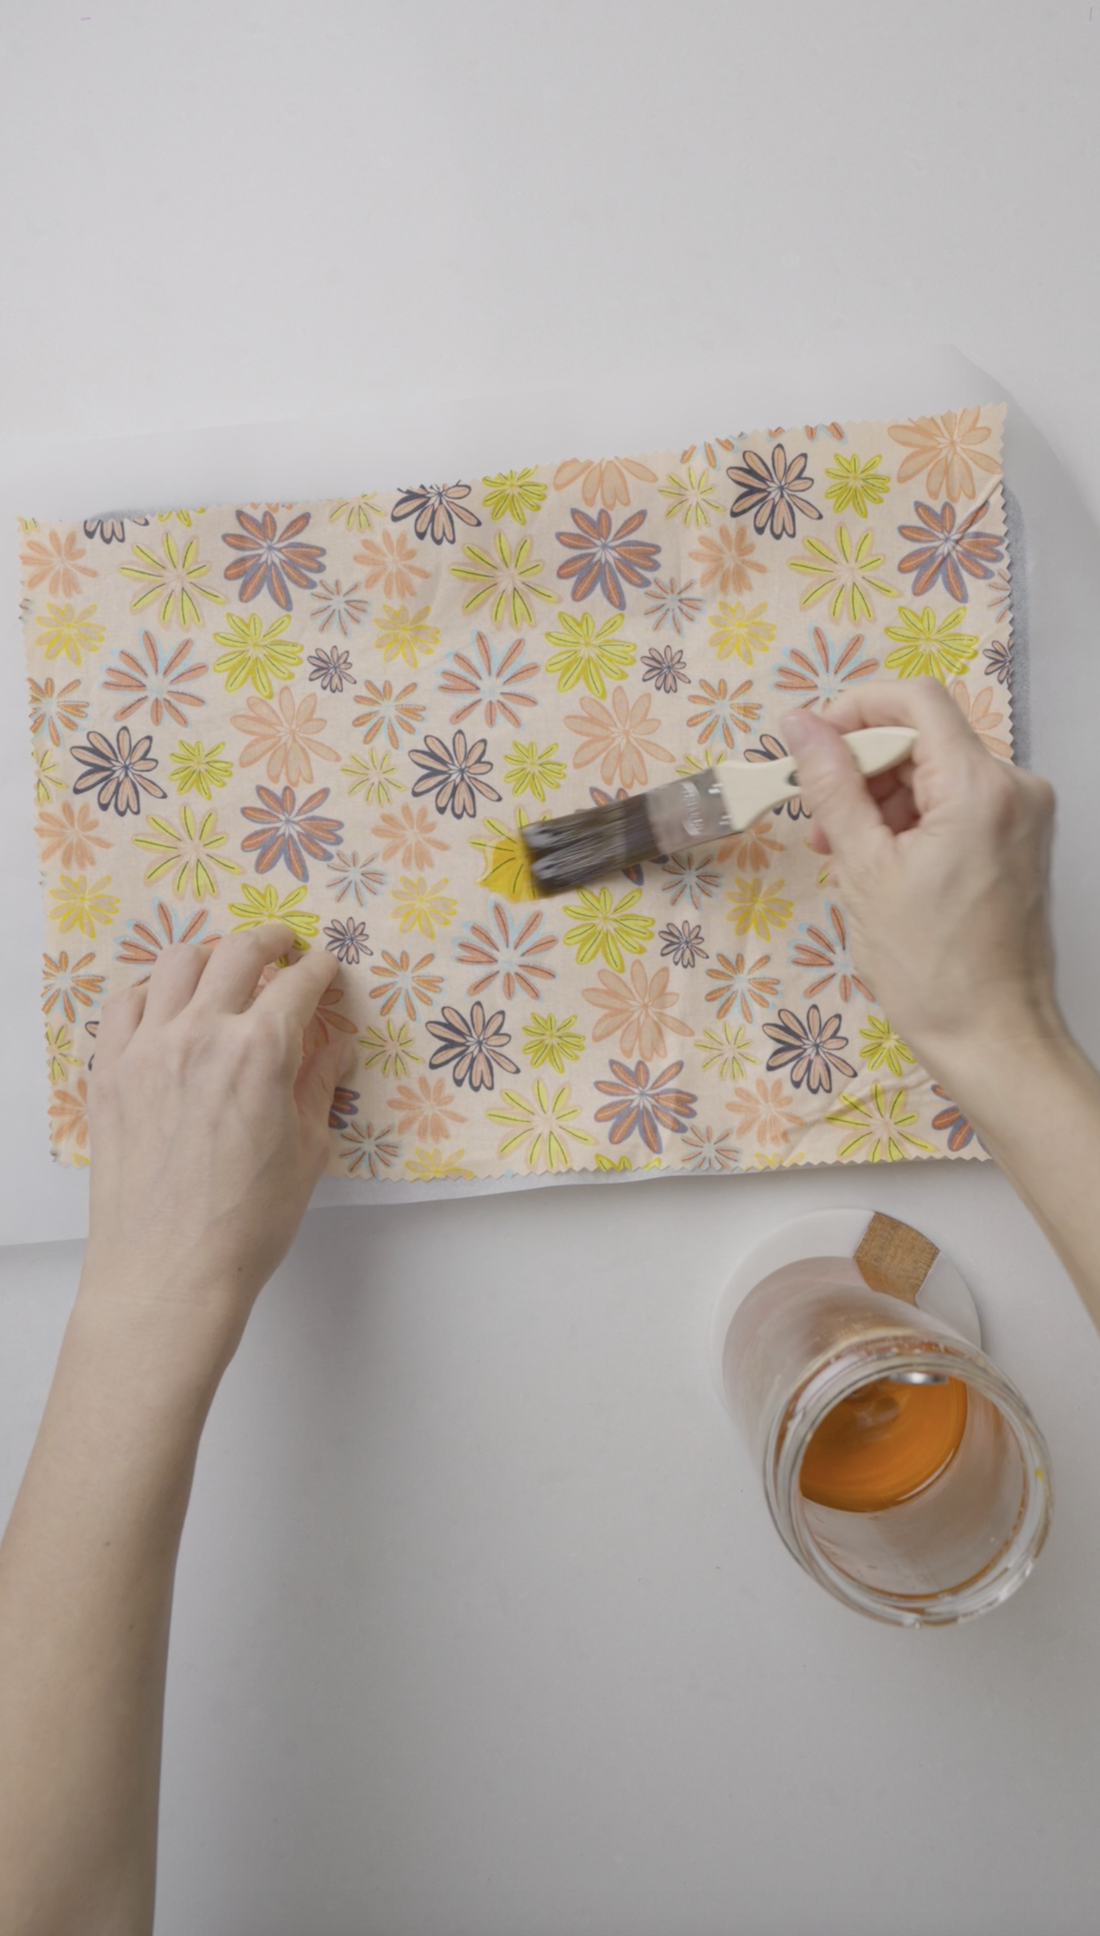 Paint fabric with beeswax mixture